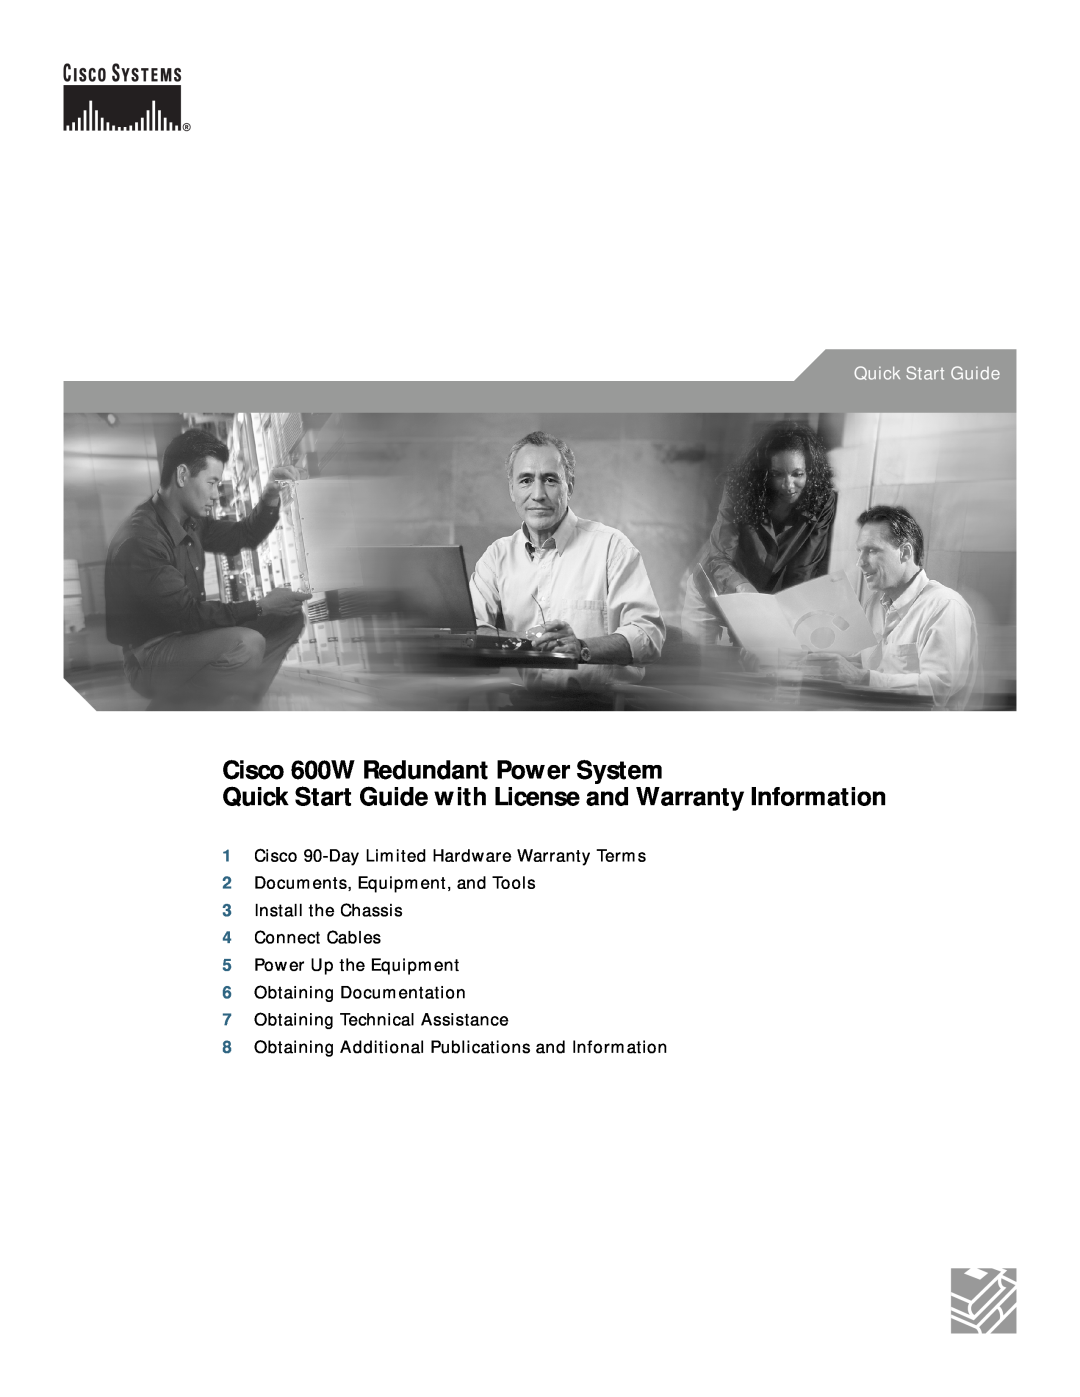 Cisco Systems quick start Cisco 600W Redundant Power System, Quick Start Guide with License and Warranty Information 